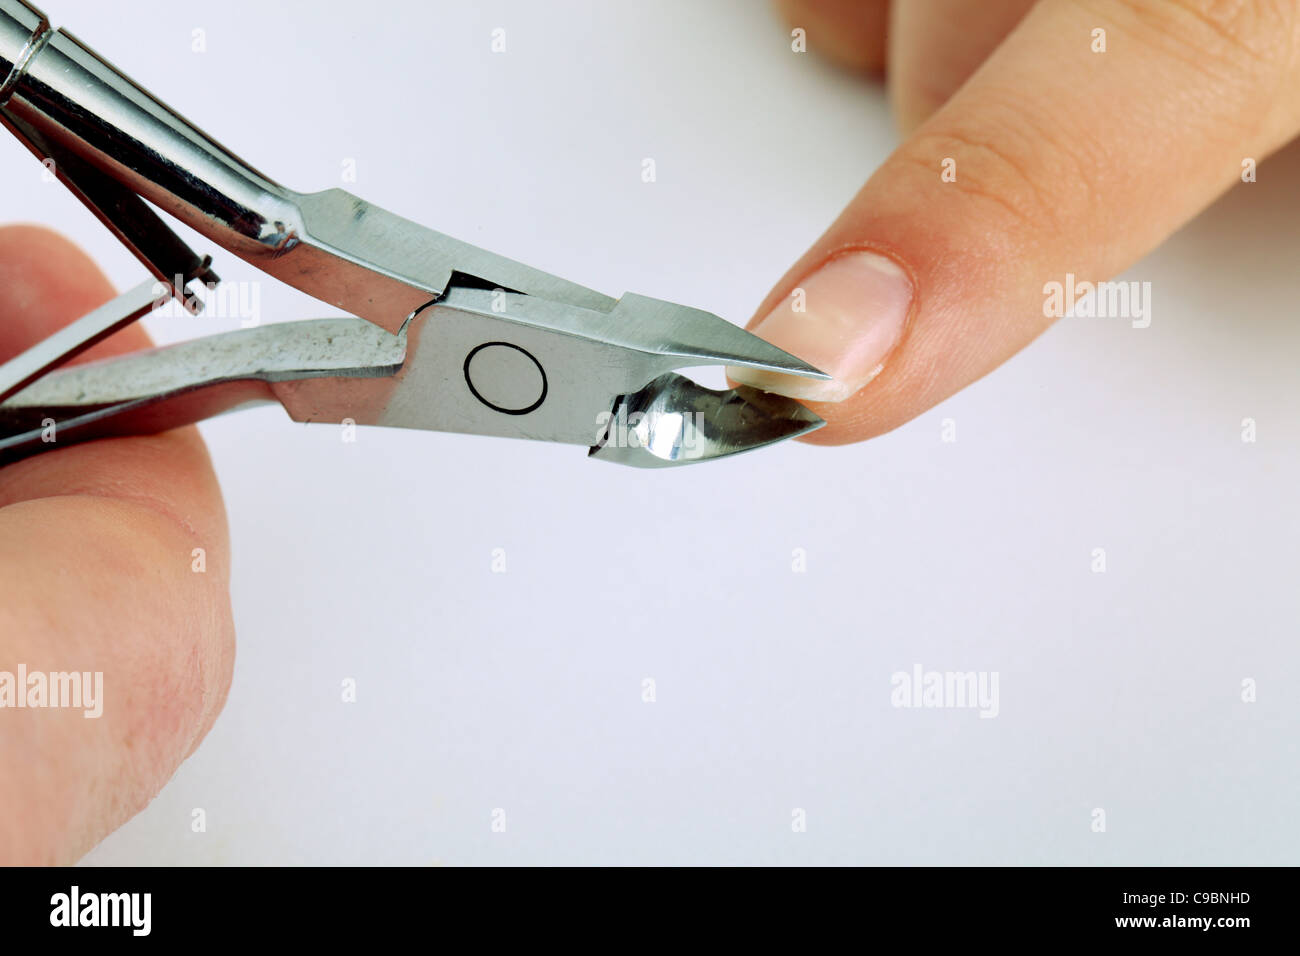 work in nail salons, nail clippers handle Stock Photo